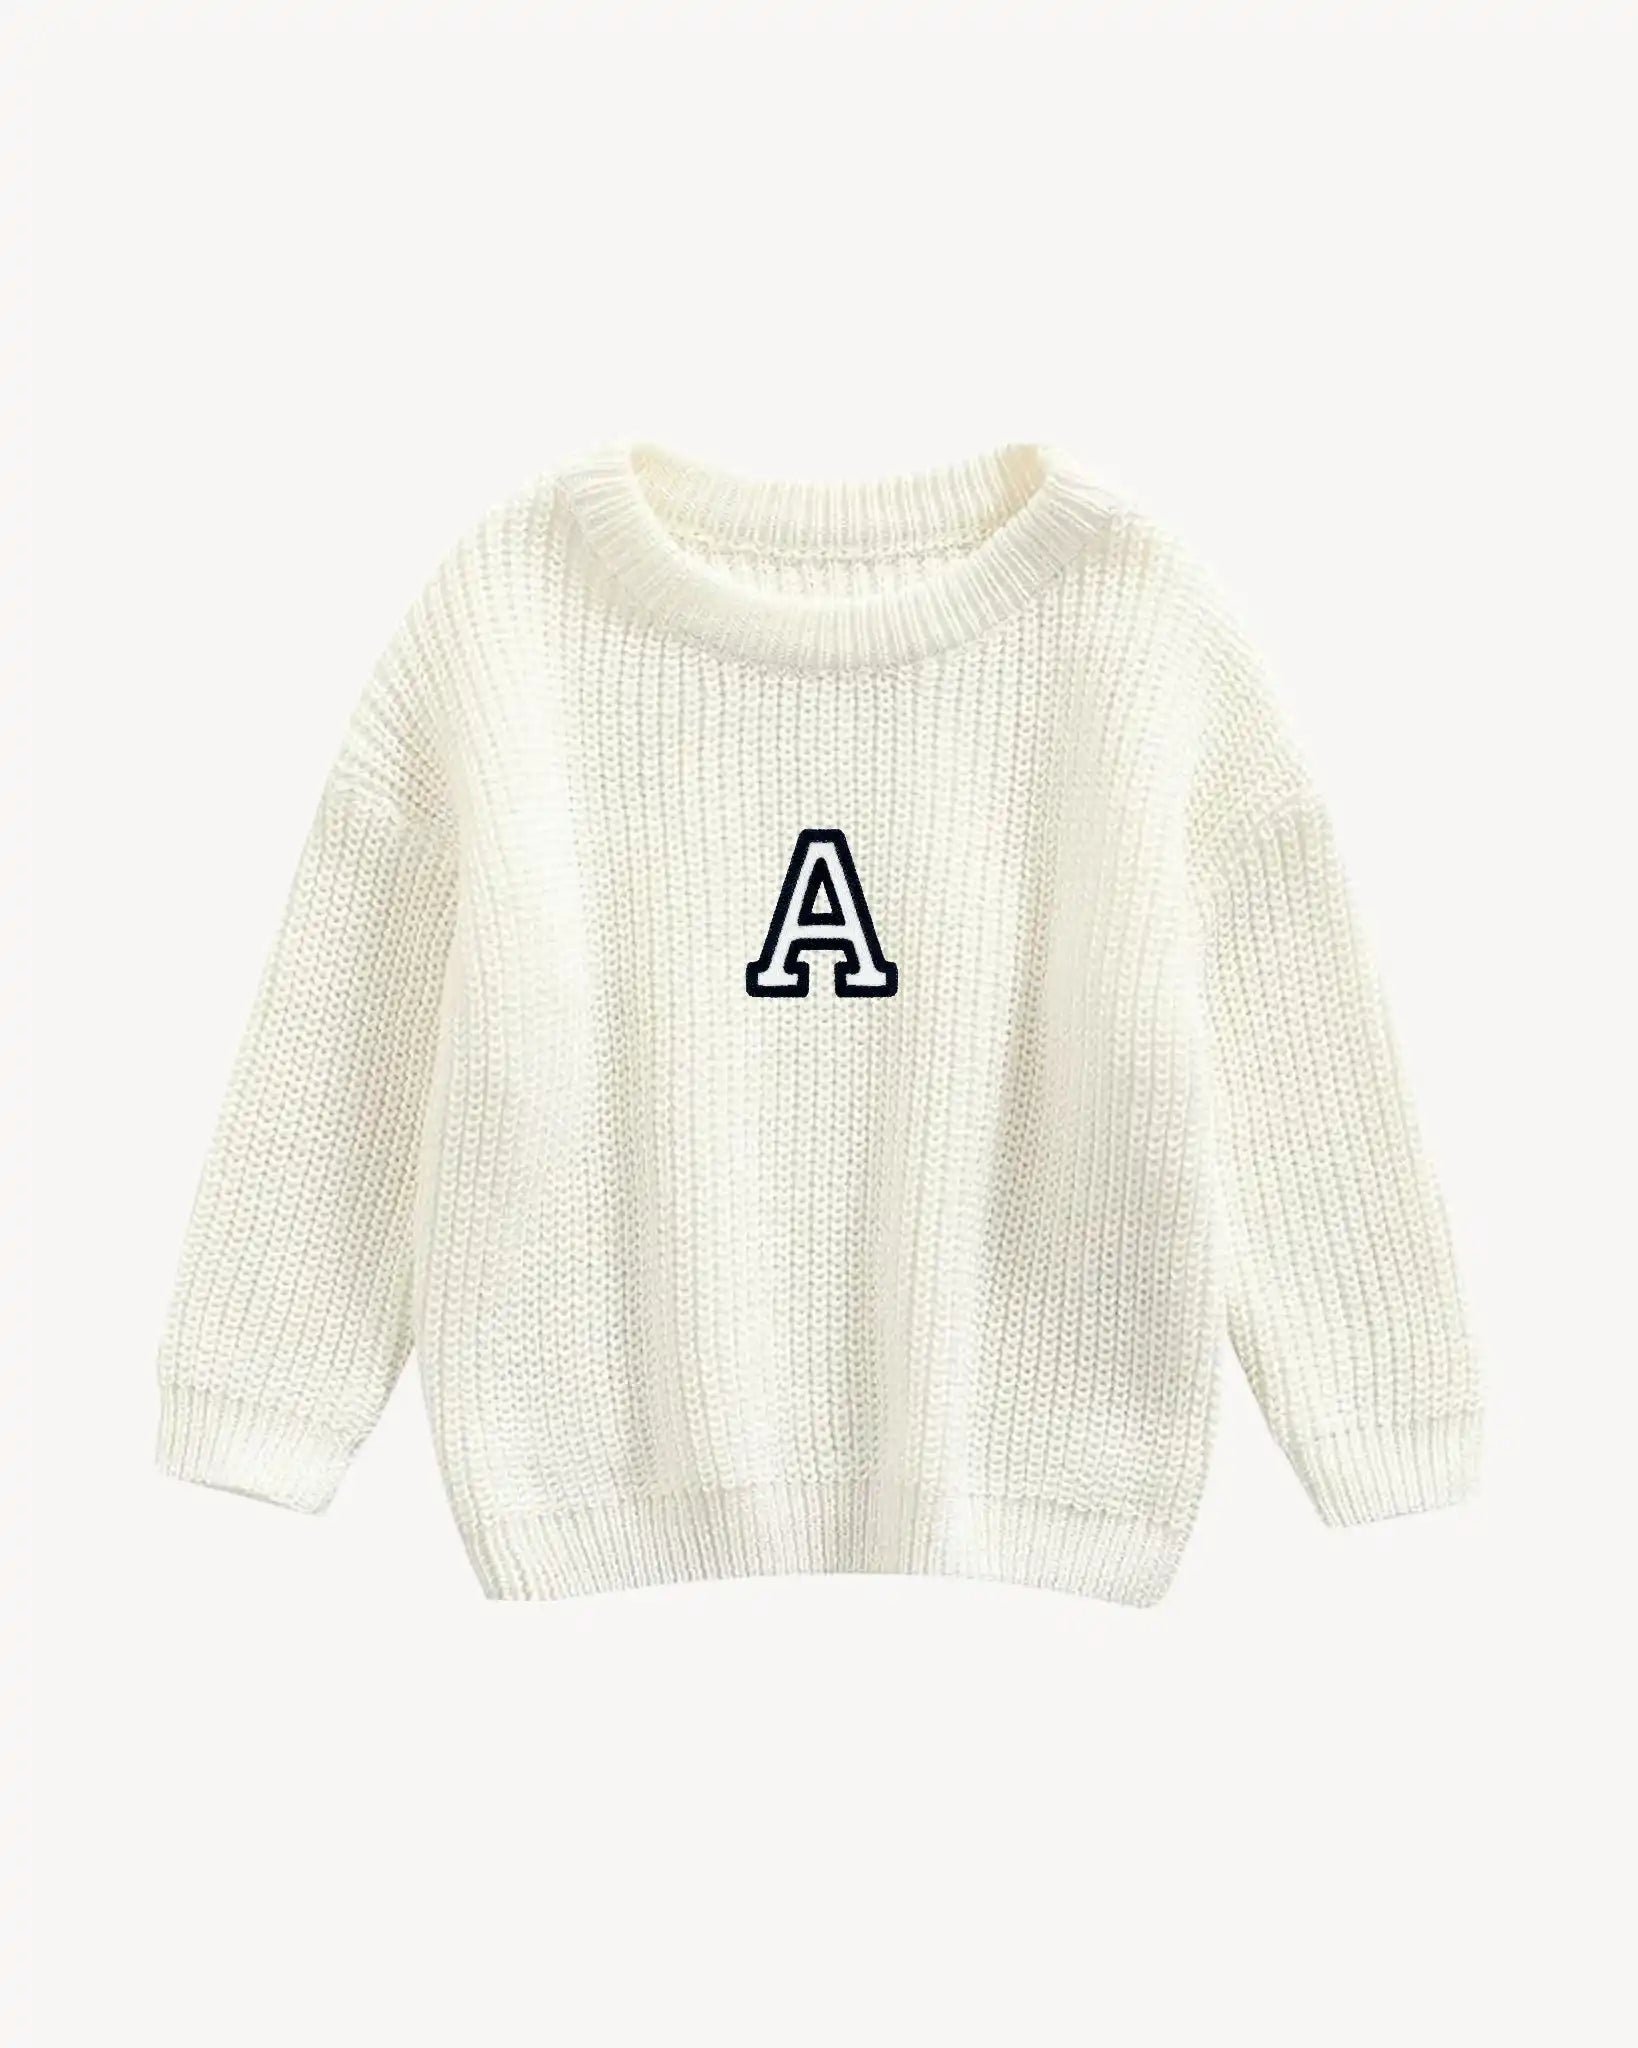 KIDS - JERSEY OFF WHITE | INICIAL MINI